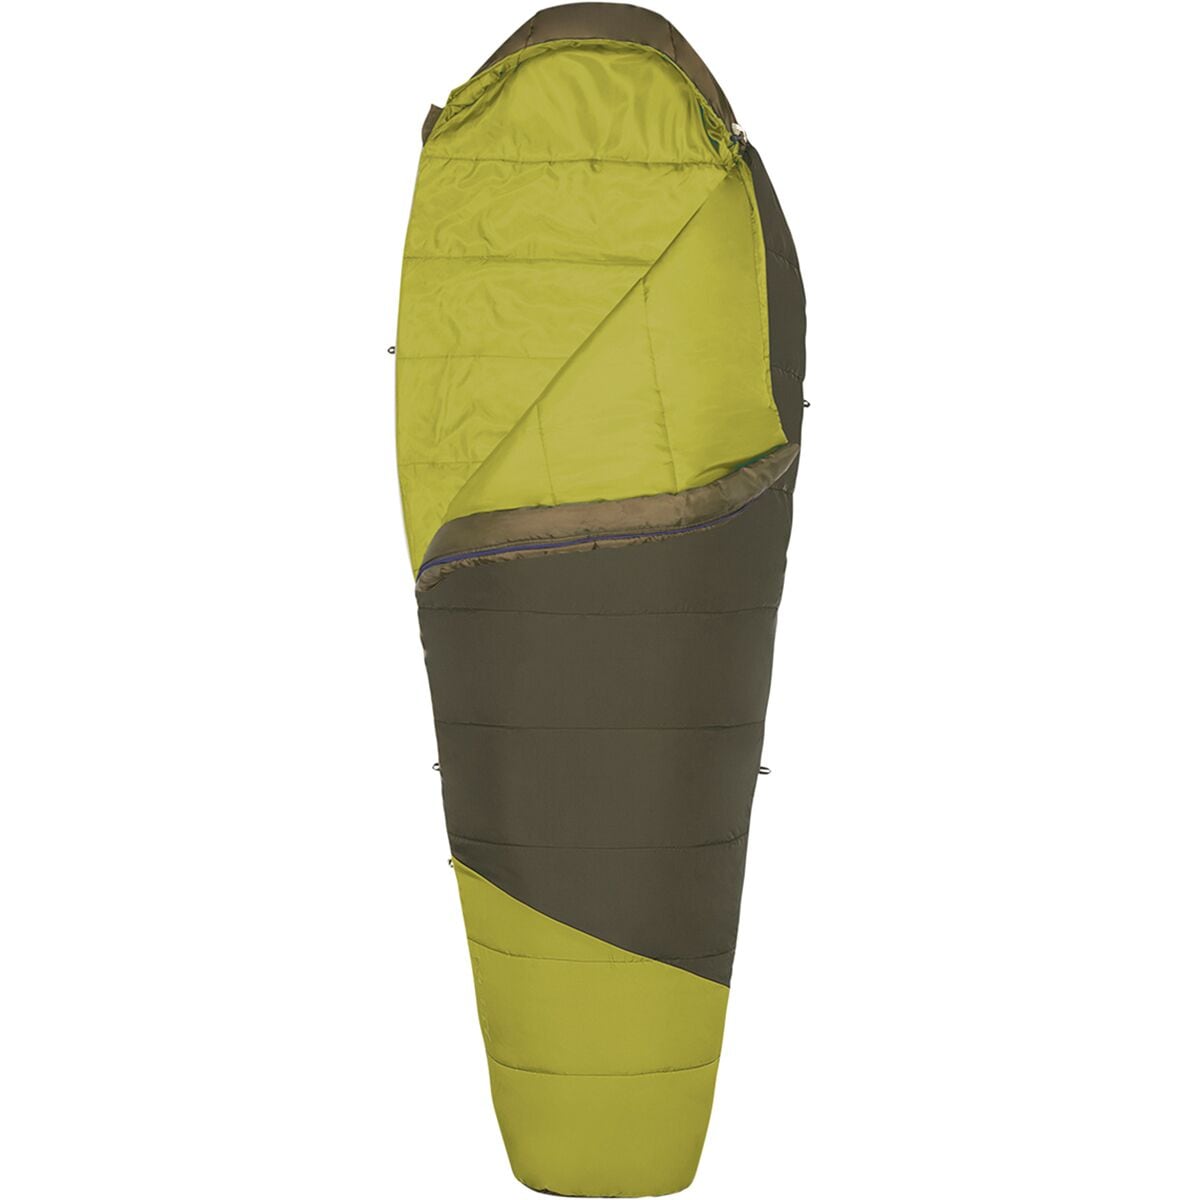 Mistral Sleeping Bag: 40F Synthetic